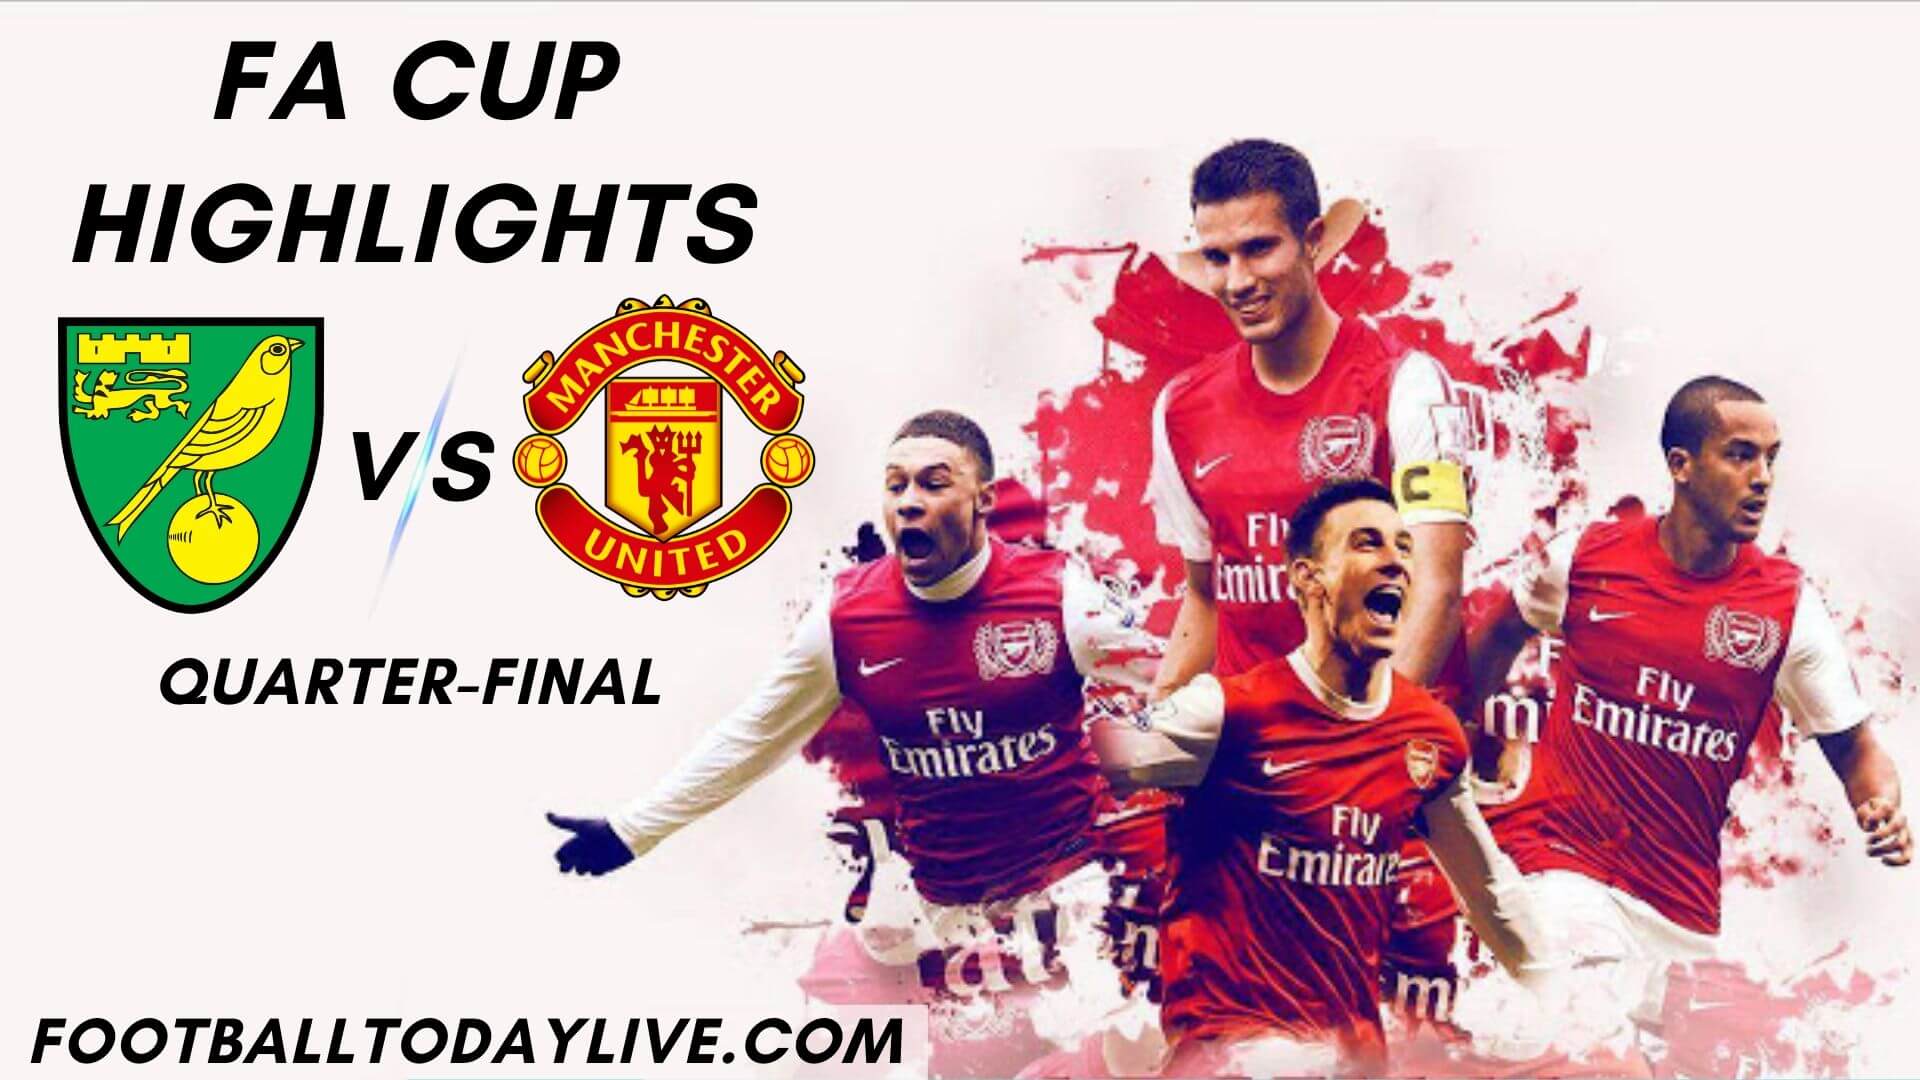 Norwich City Vs Manchester United Highlights 2020 FA Cup QF